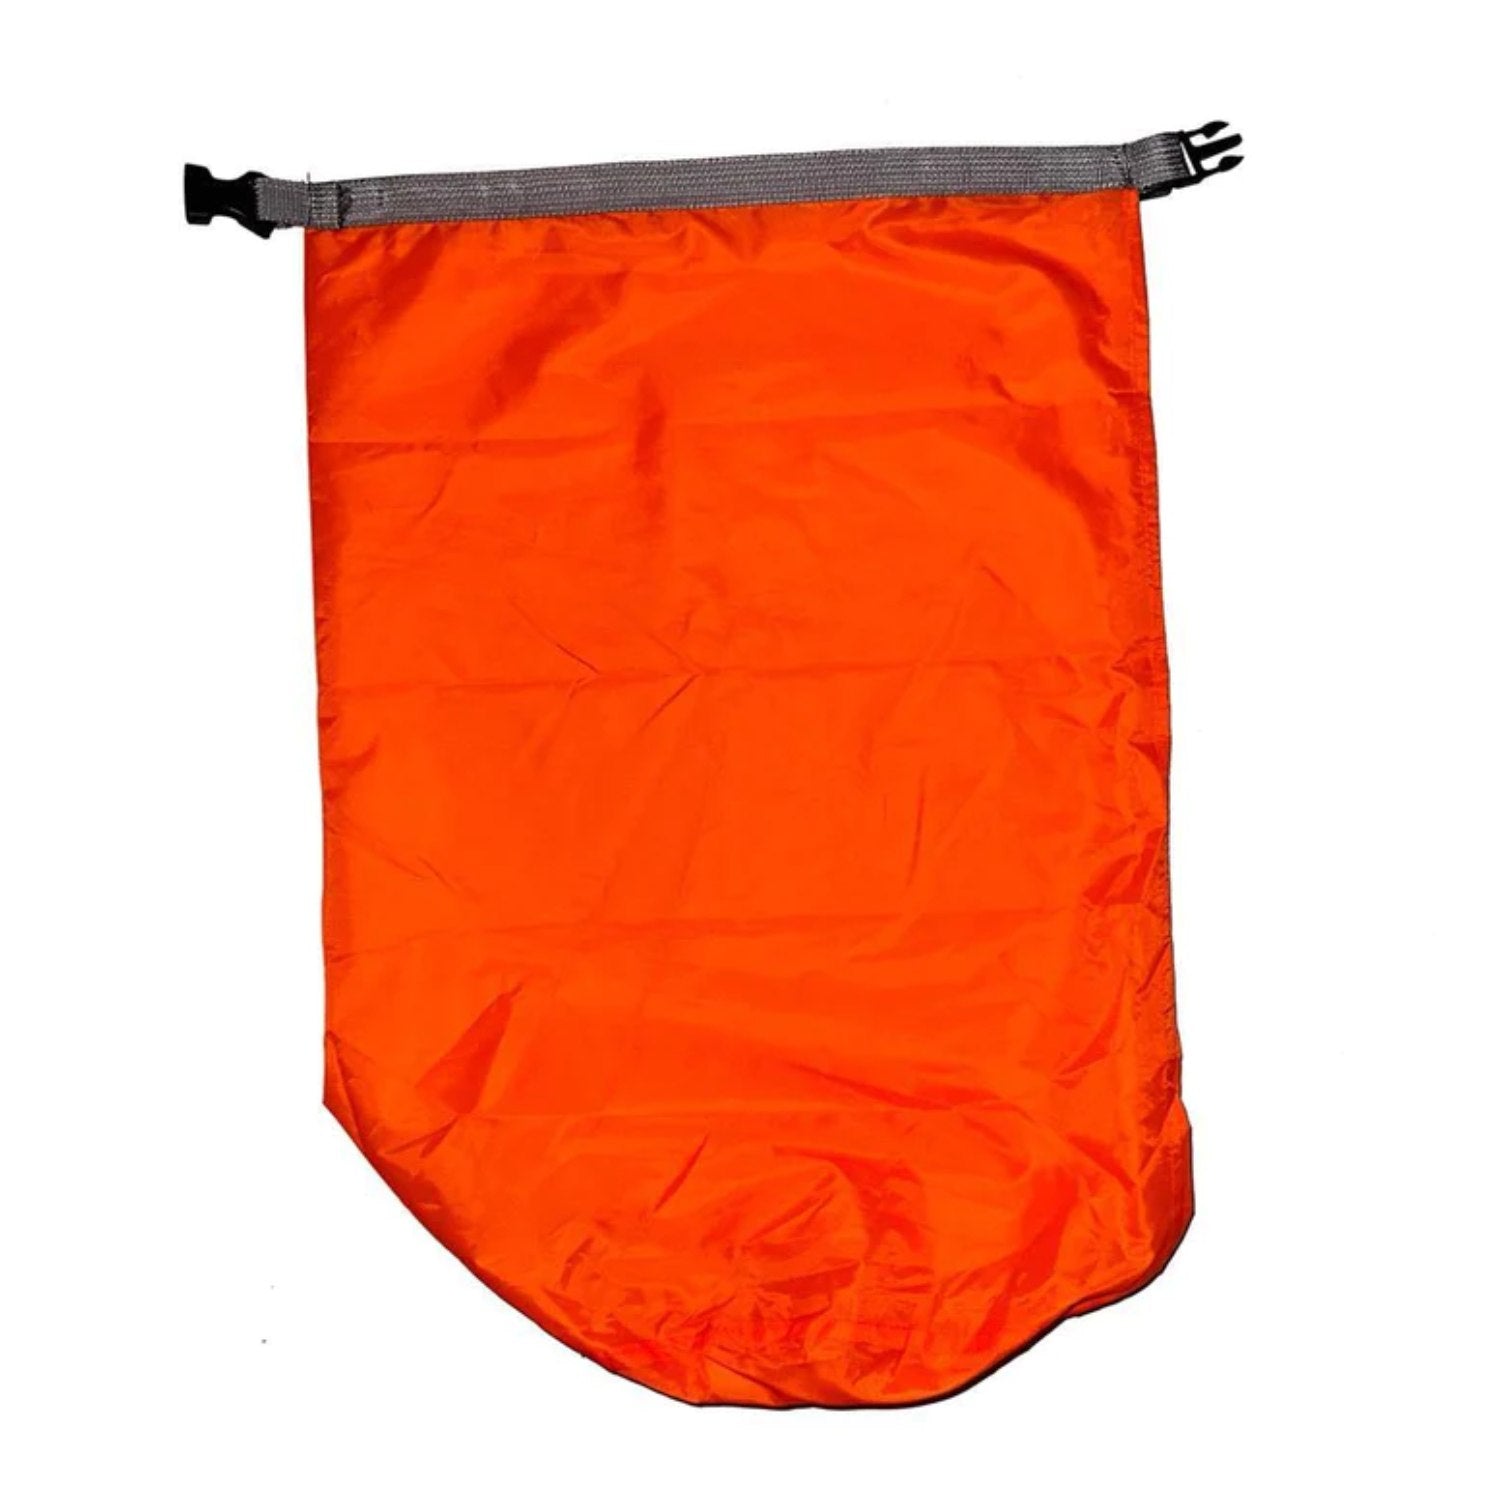 Buy Gokyo Waterproof Dry Sack Ultralight & Thin 20 Ltr | Waterproof Dry Bags, Pouches at Gokyo Outdoor Clothing & Gear